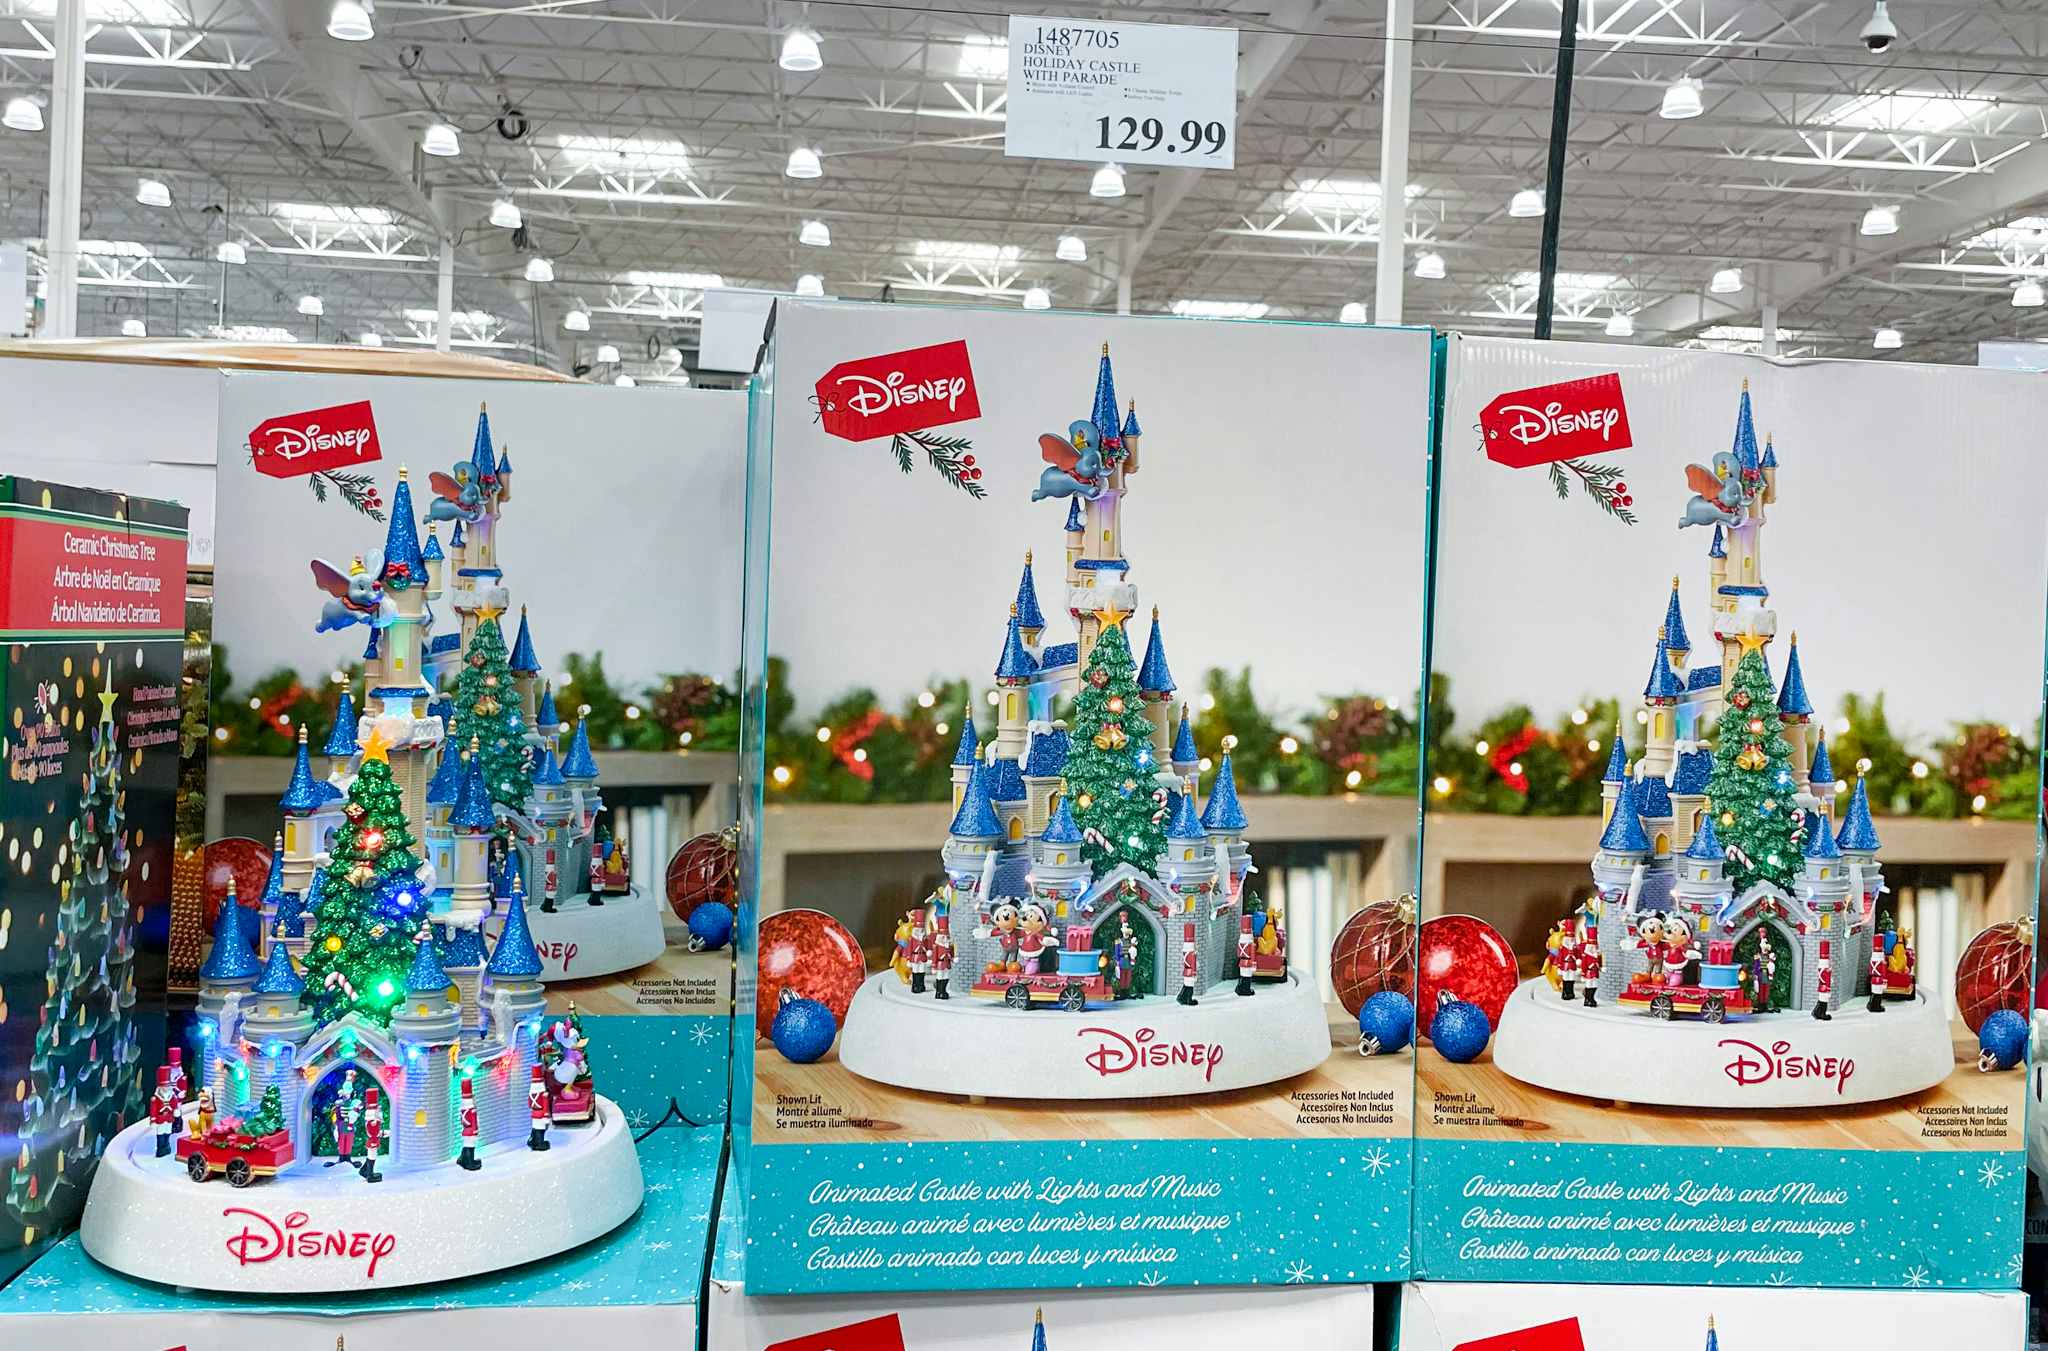 disney holiday castle on display at costco with sales sign